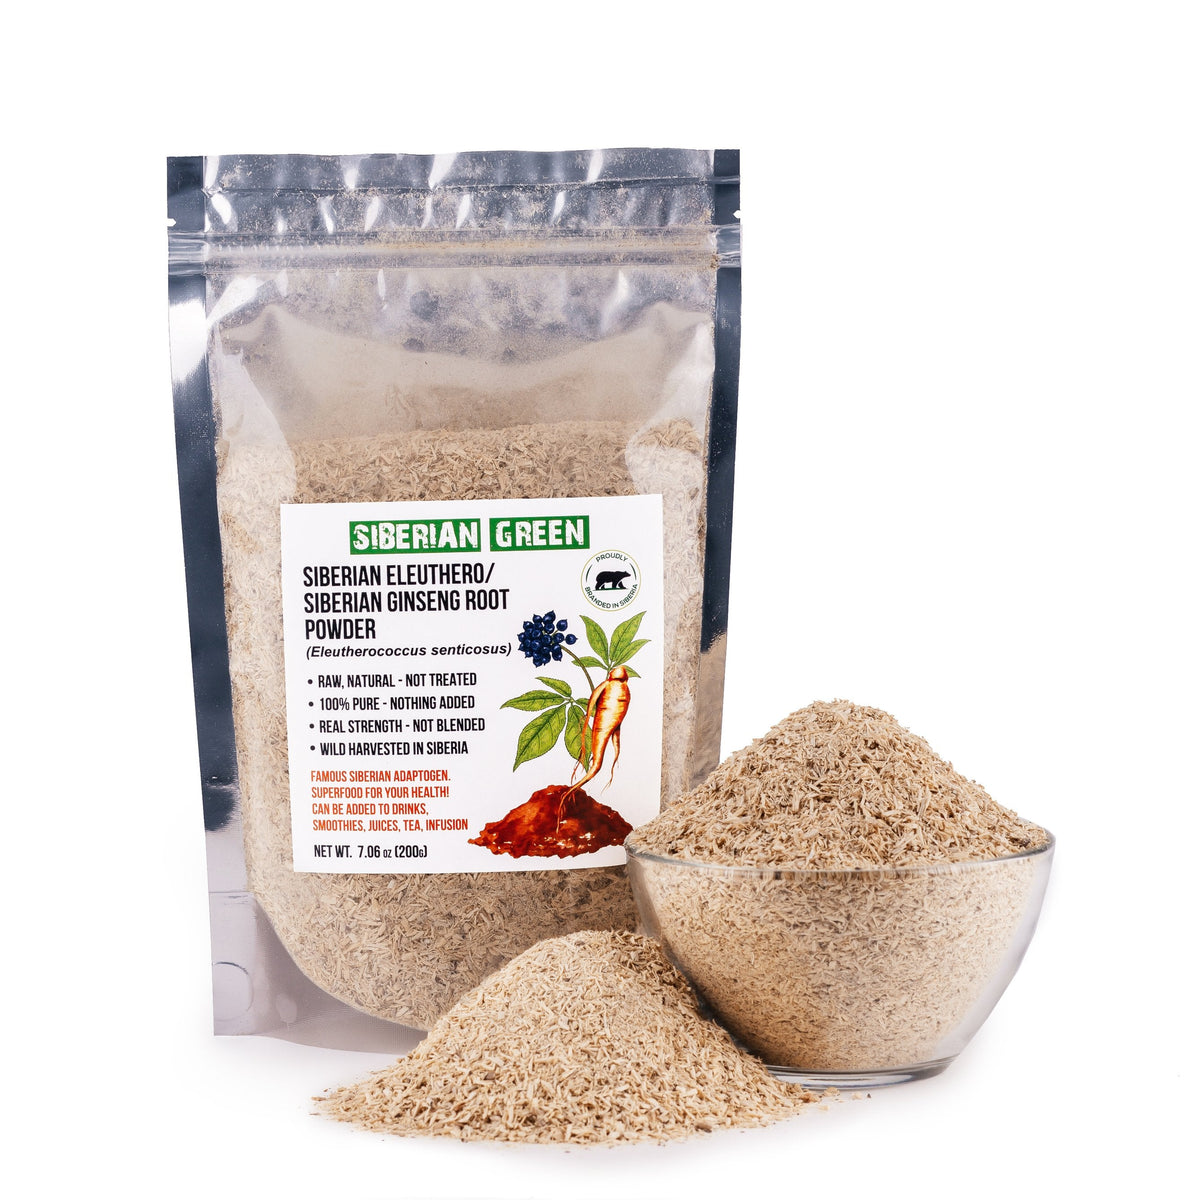 Siberian Ginseng Dried Root Powder 200g Eleutherococcus Senticosus Siberian Eleuthero Cut Sifted 100% Pure Natural